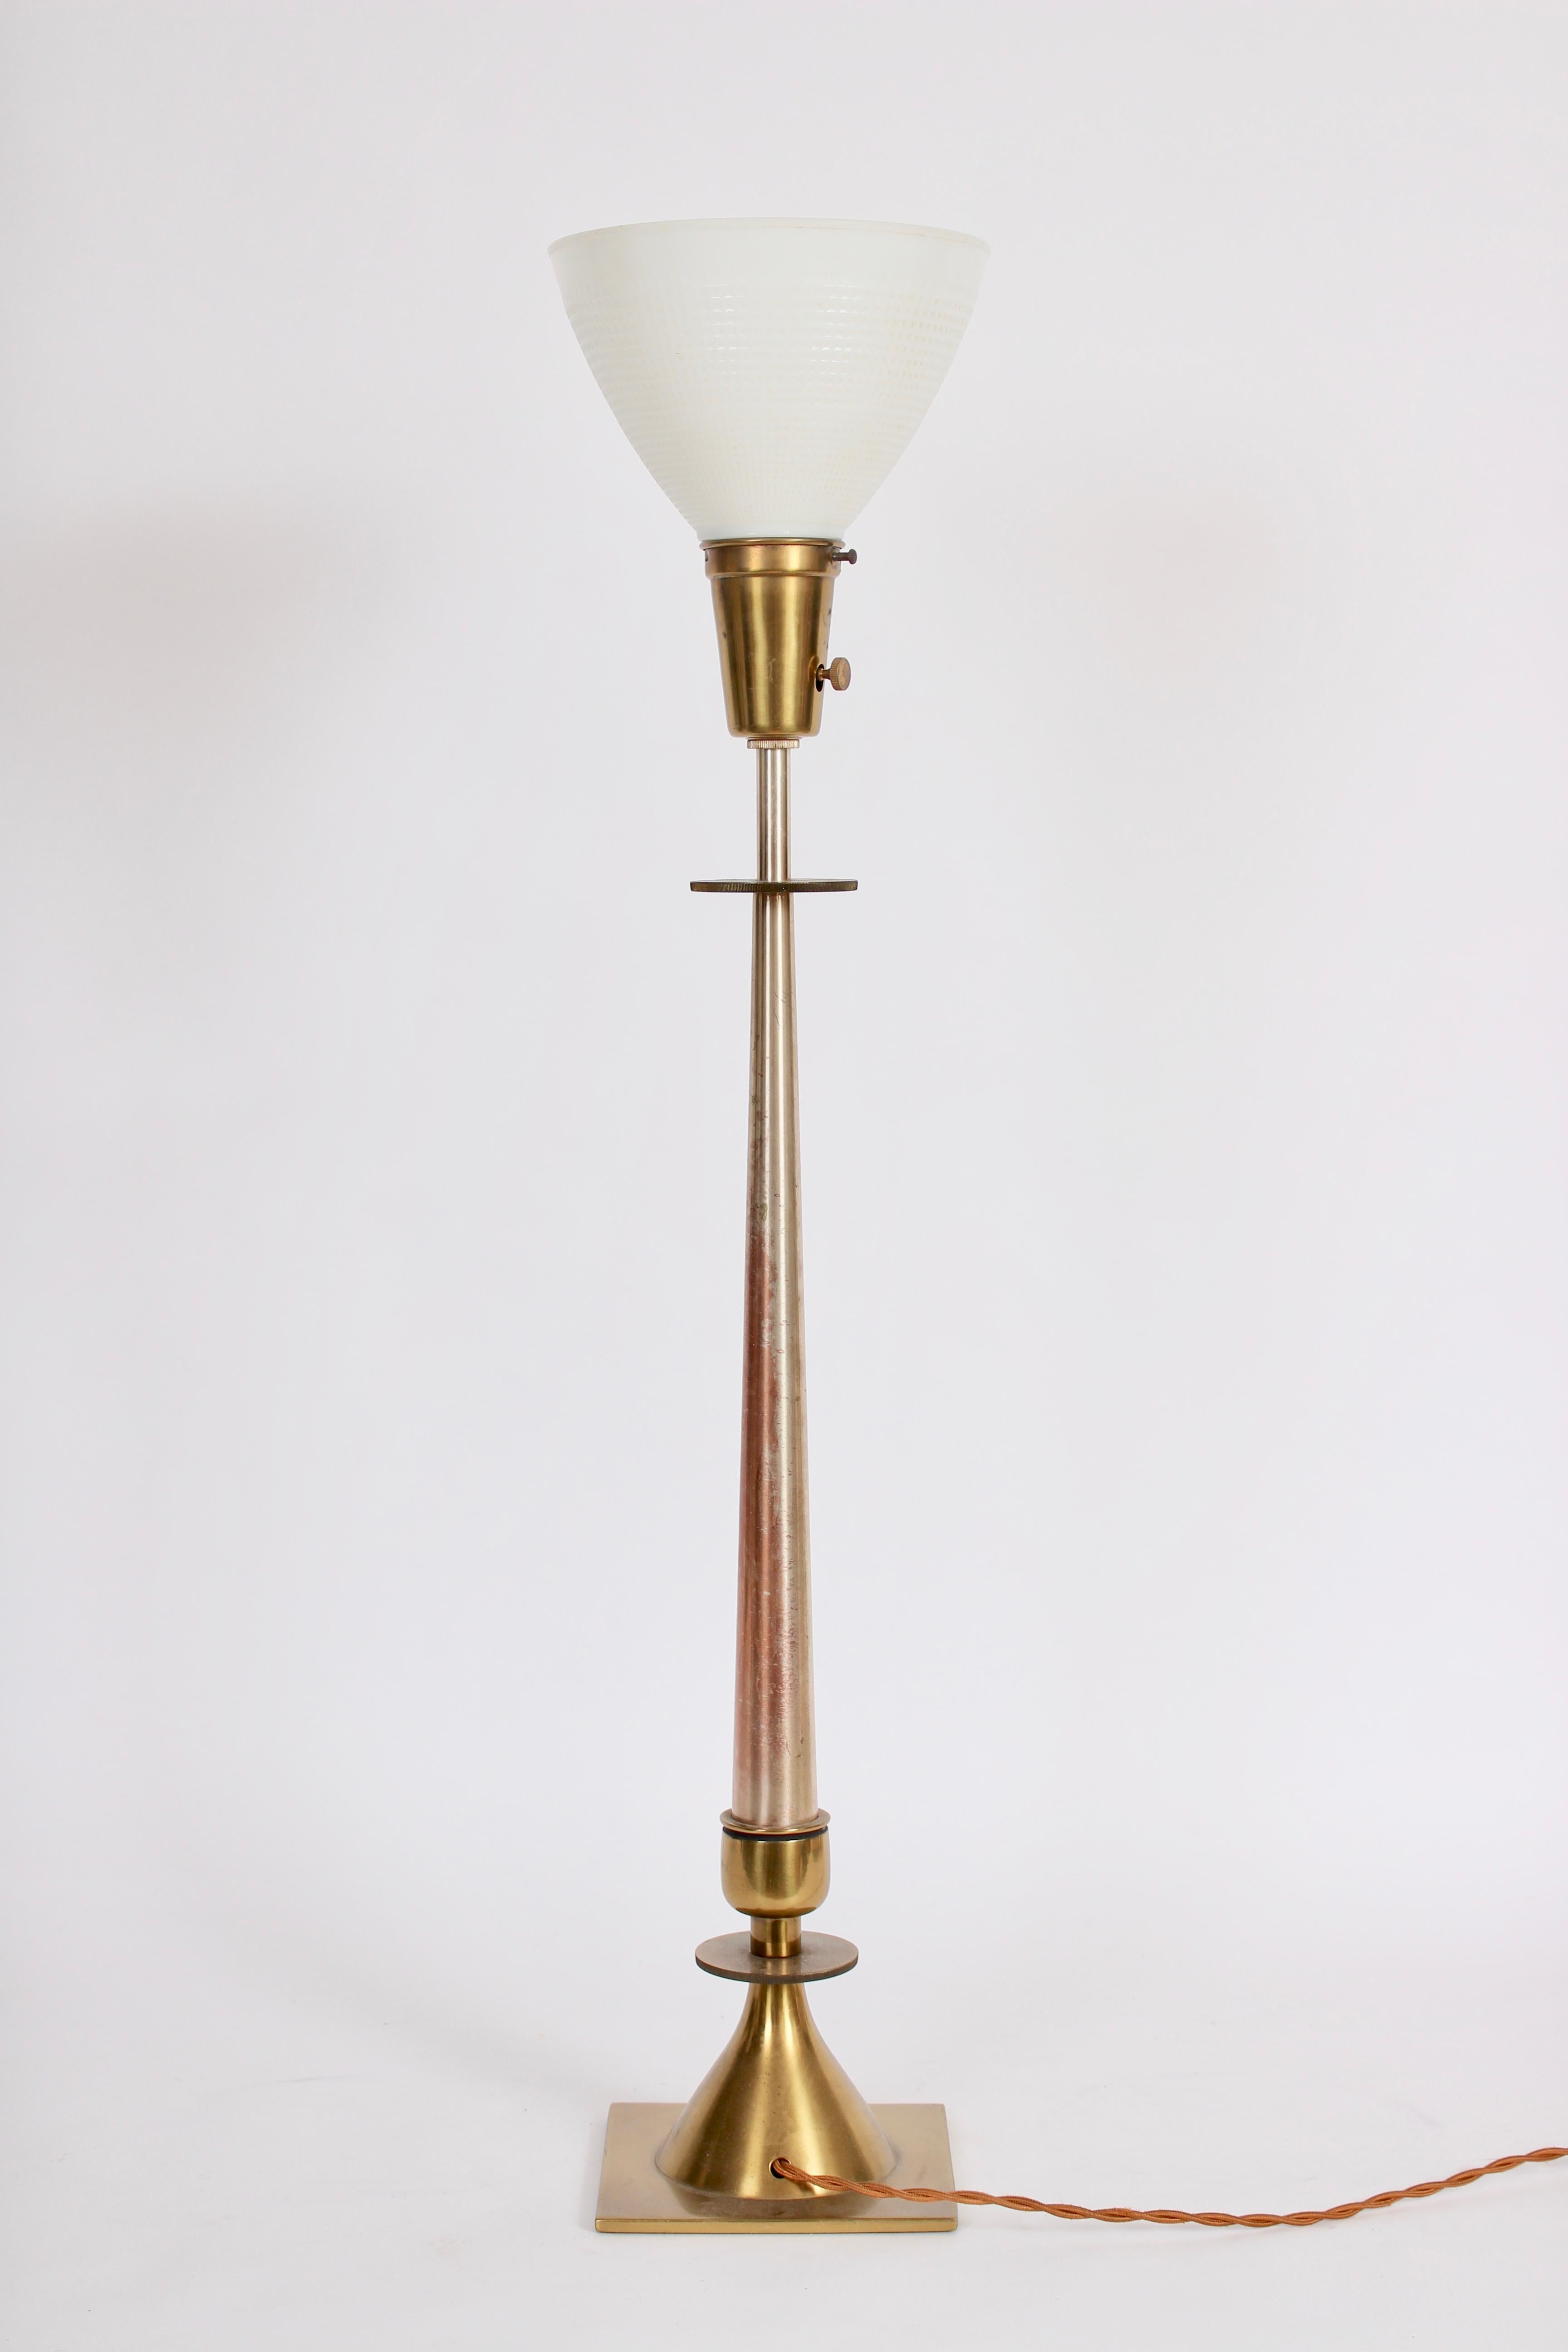 vintage brass floor lamp with glass shade